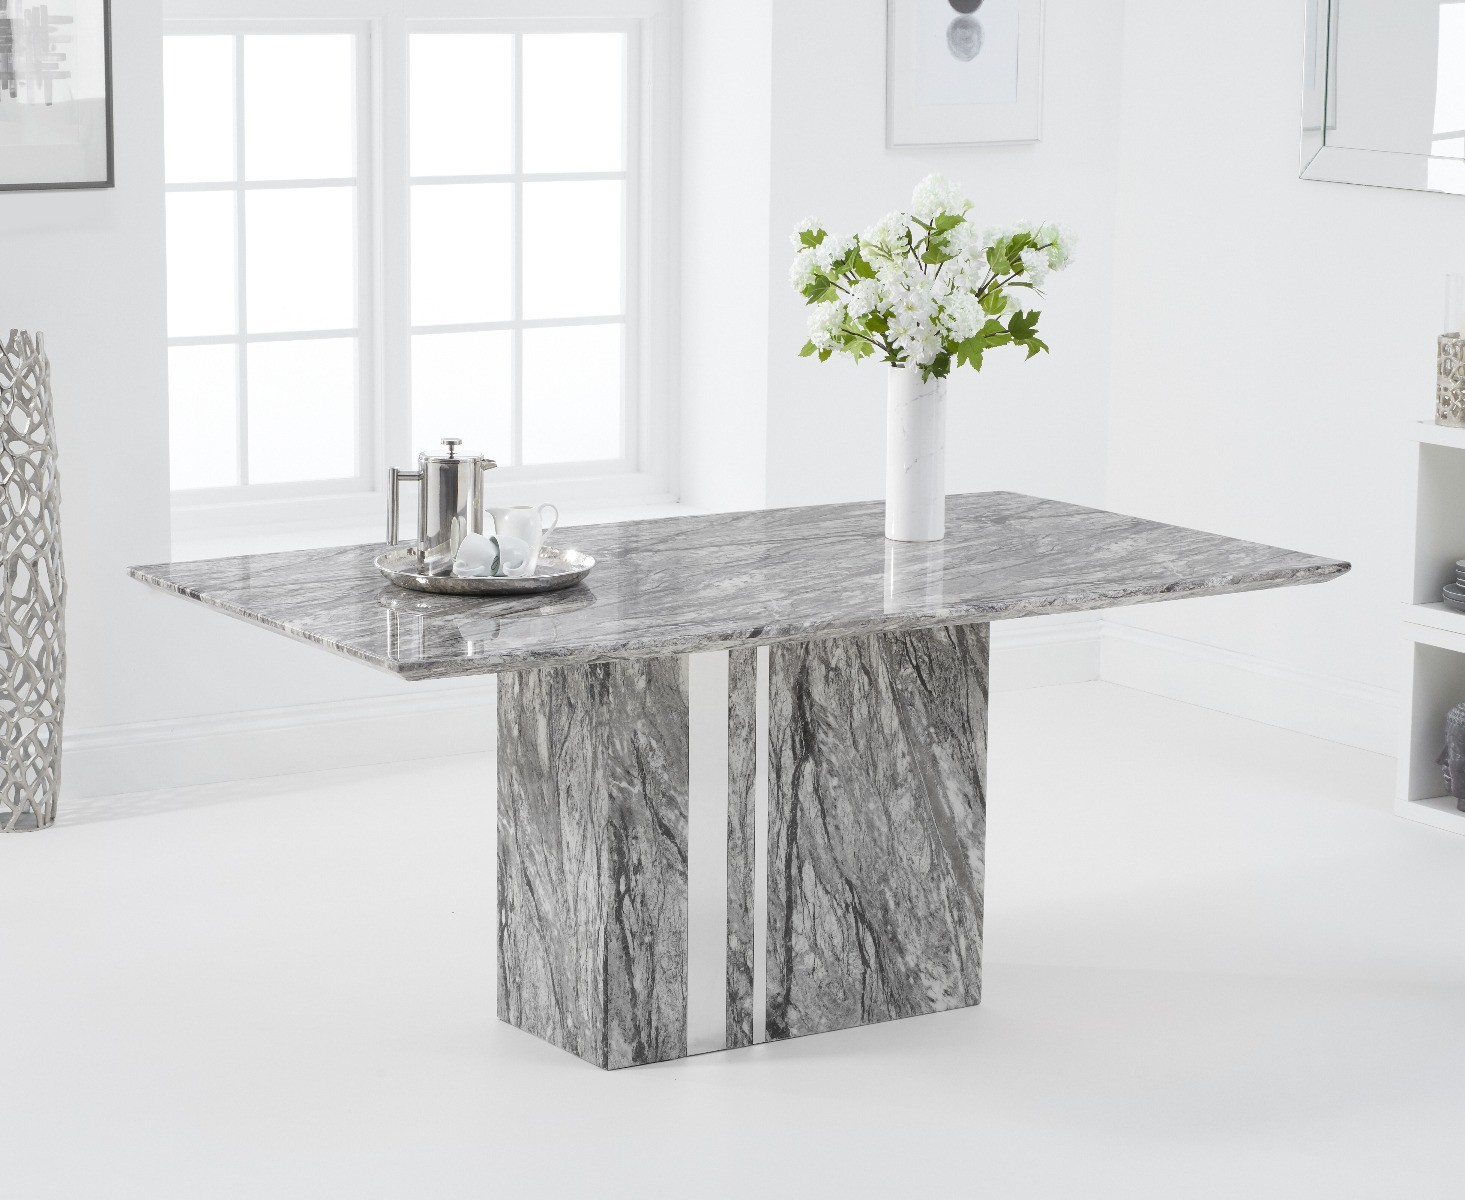 Photo 2 of Alicia 180cm grey marble dining table with 4 grey austin chairs